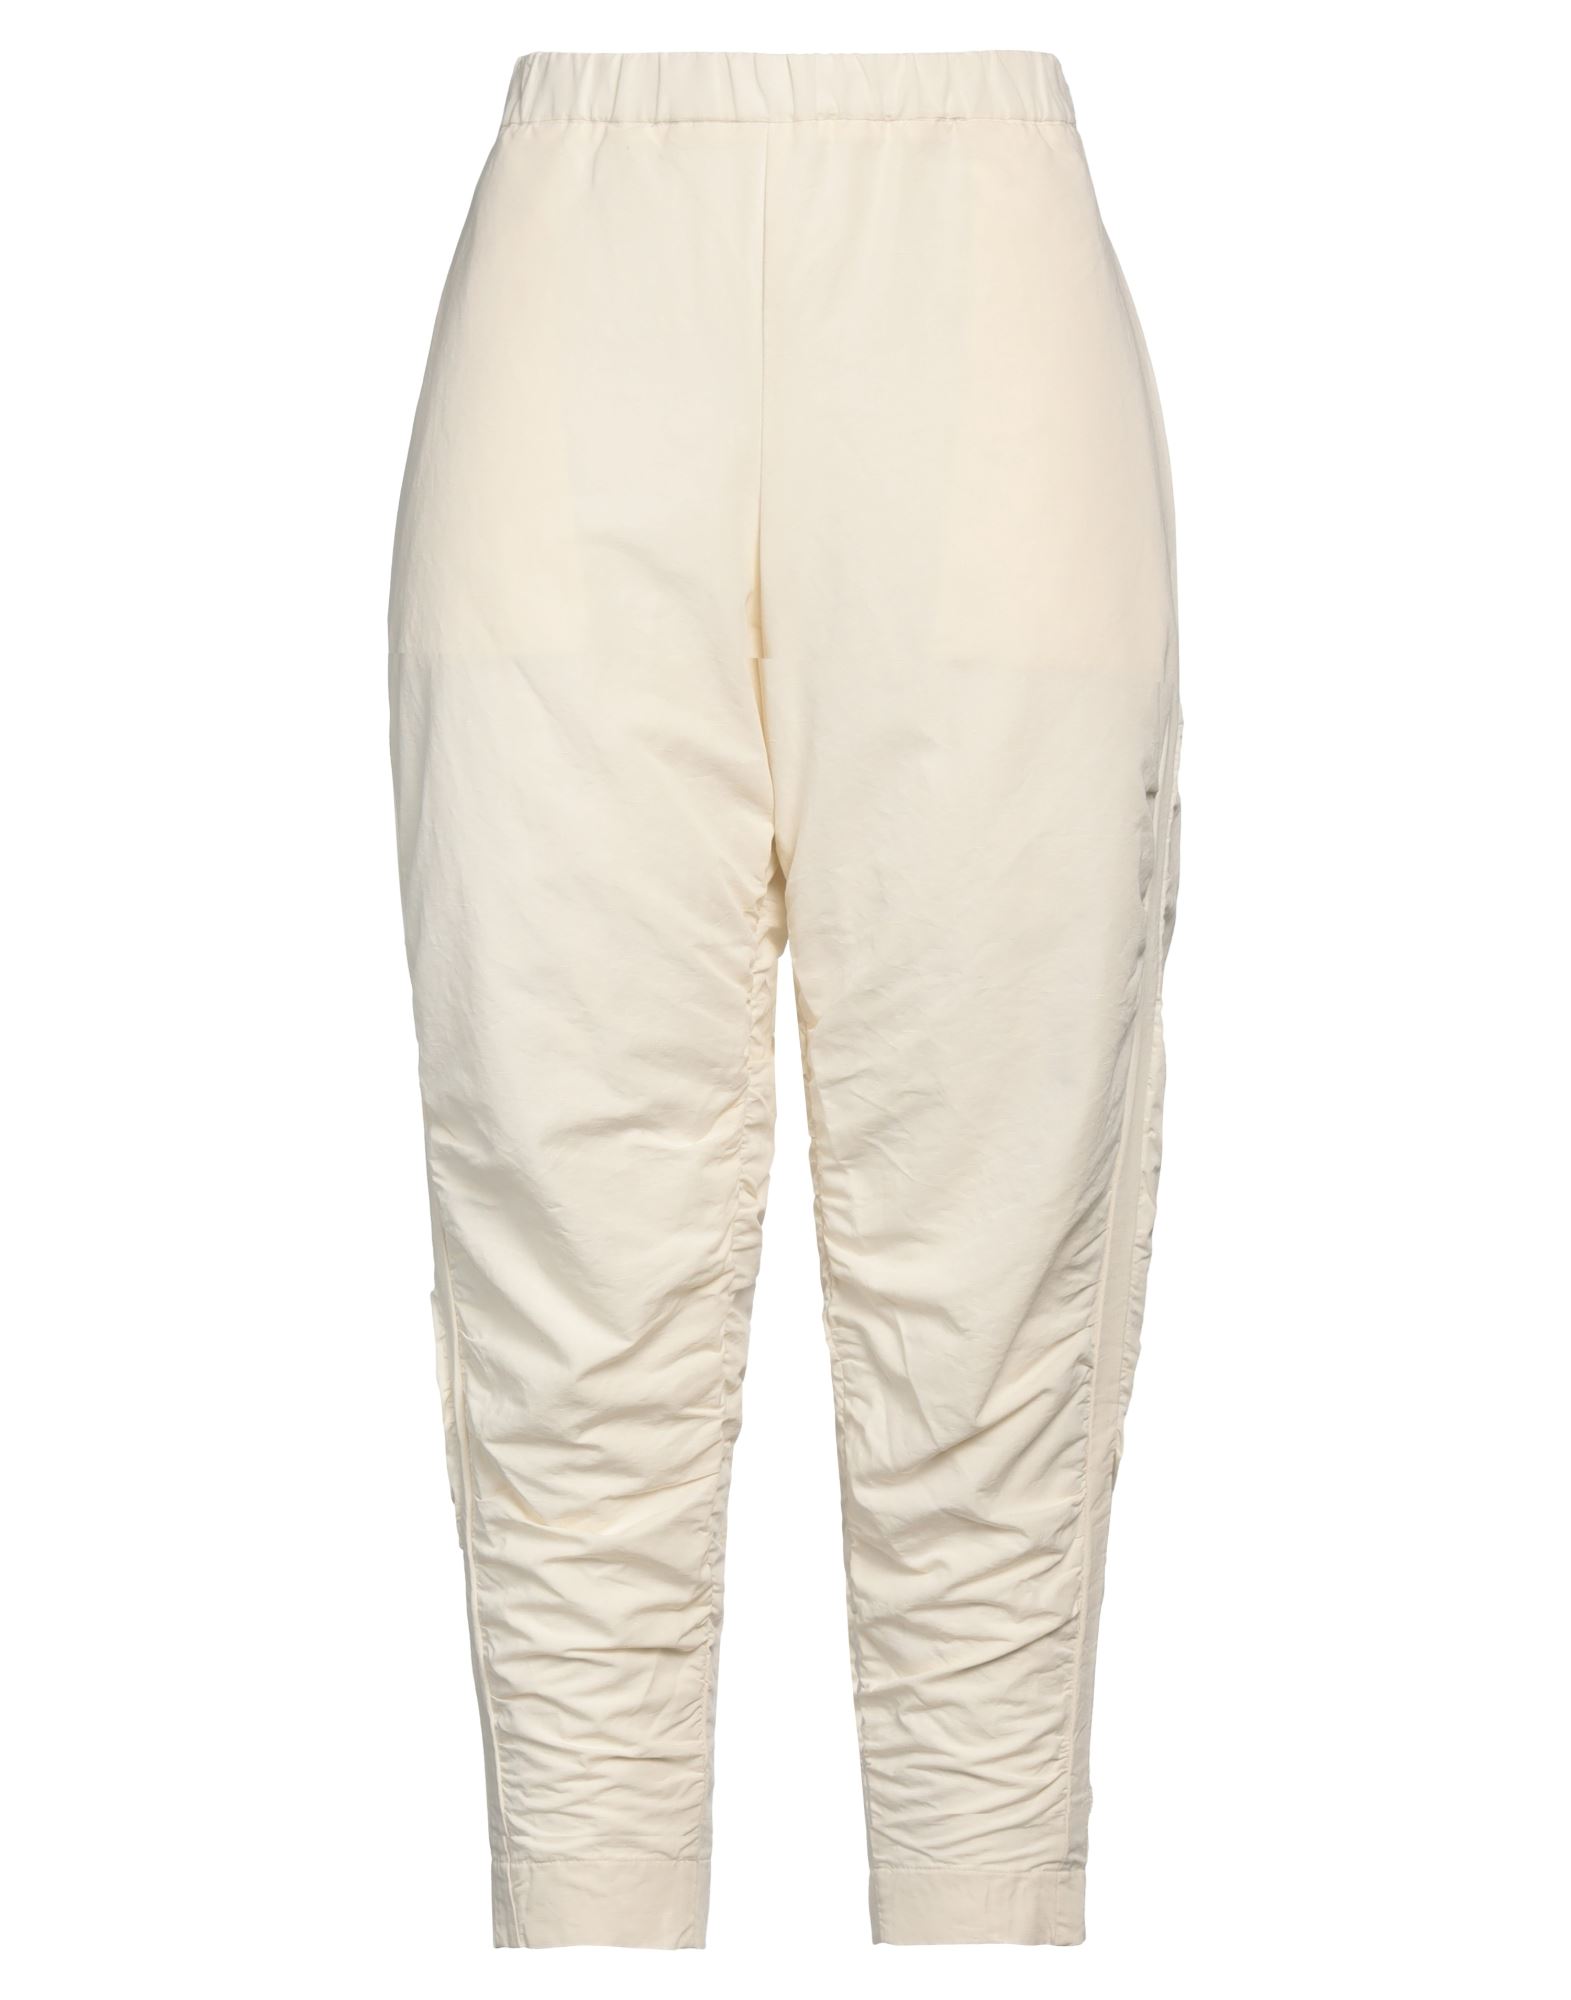 Art 259 Design By Alberto Affinito Pants In White